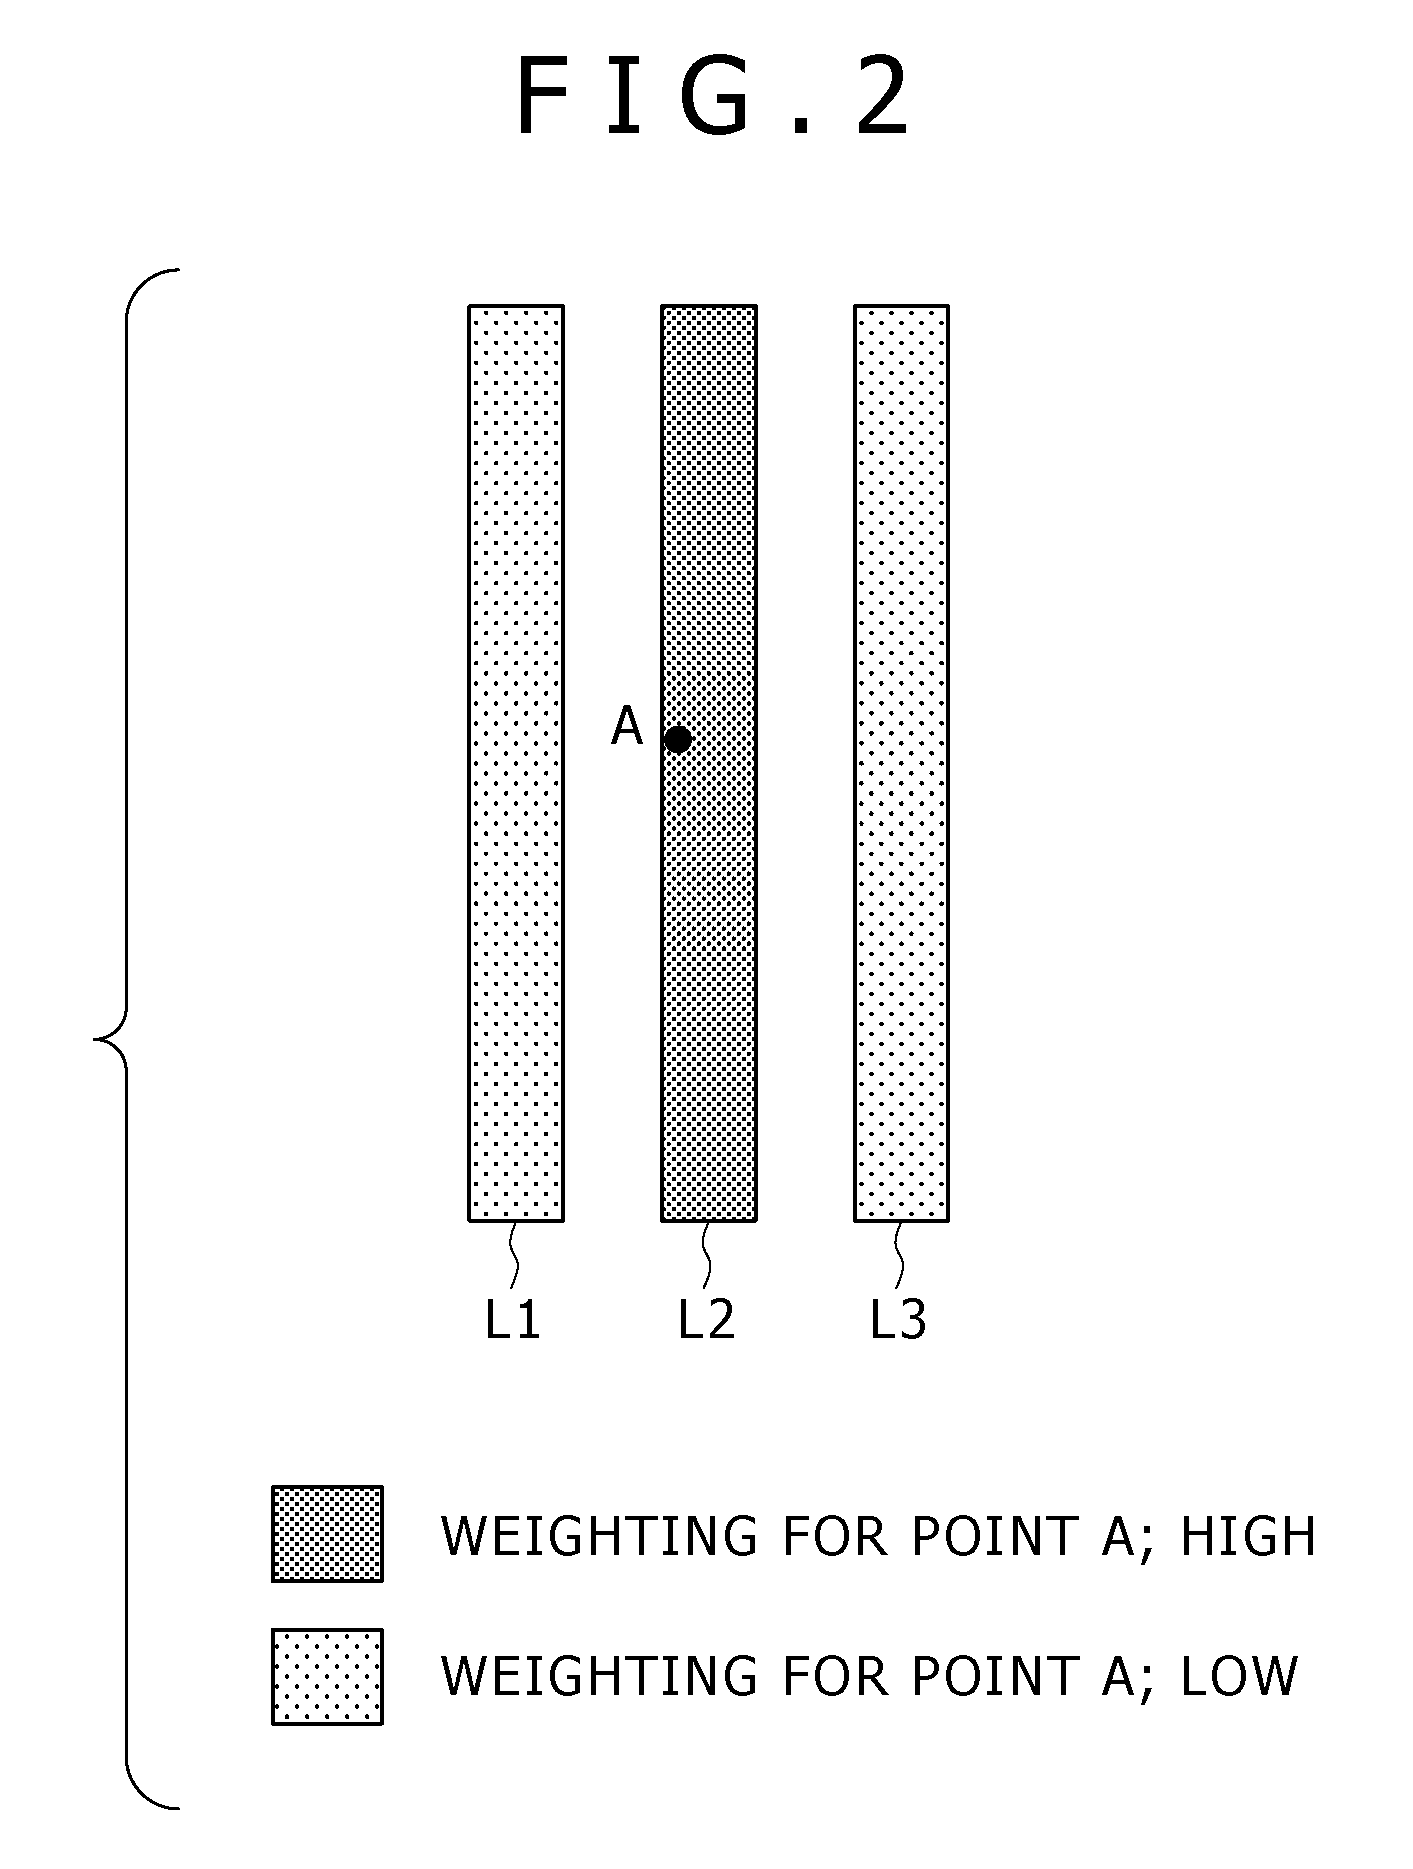 Proximity effect correction with regard to a semiconductor circuit design pattern